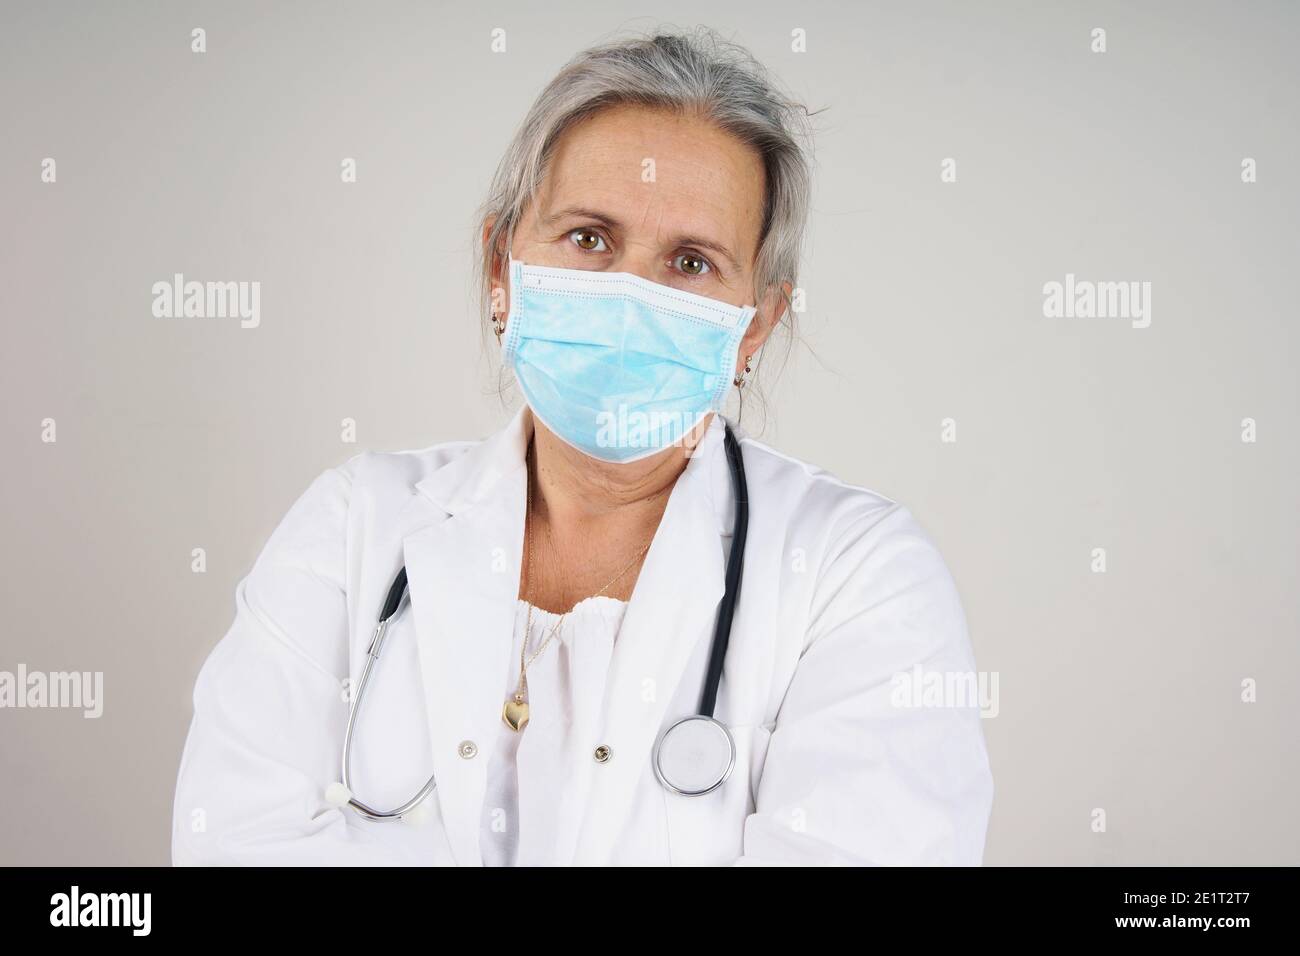 Tired overworked or fed up helathcare worker, pandemic concept Stock Photo